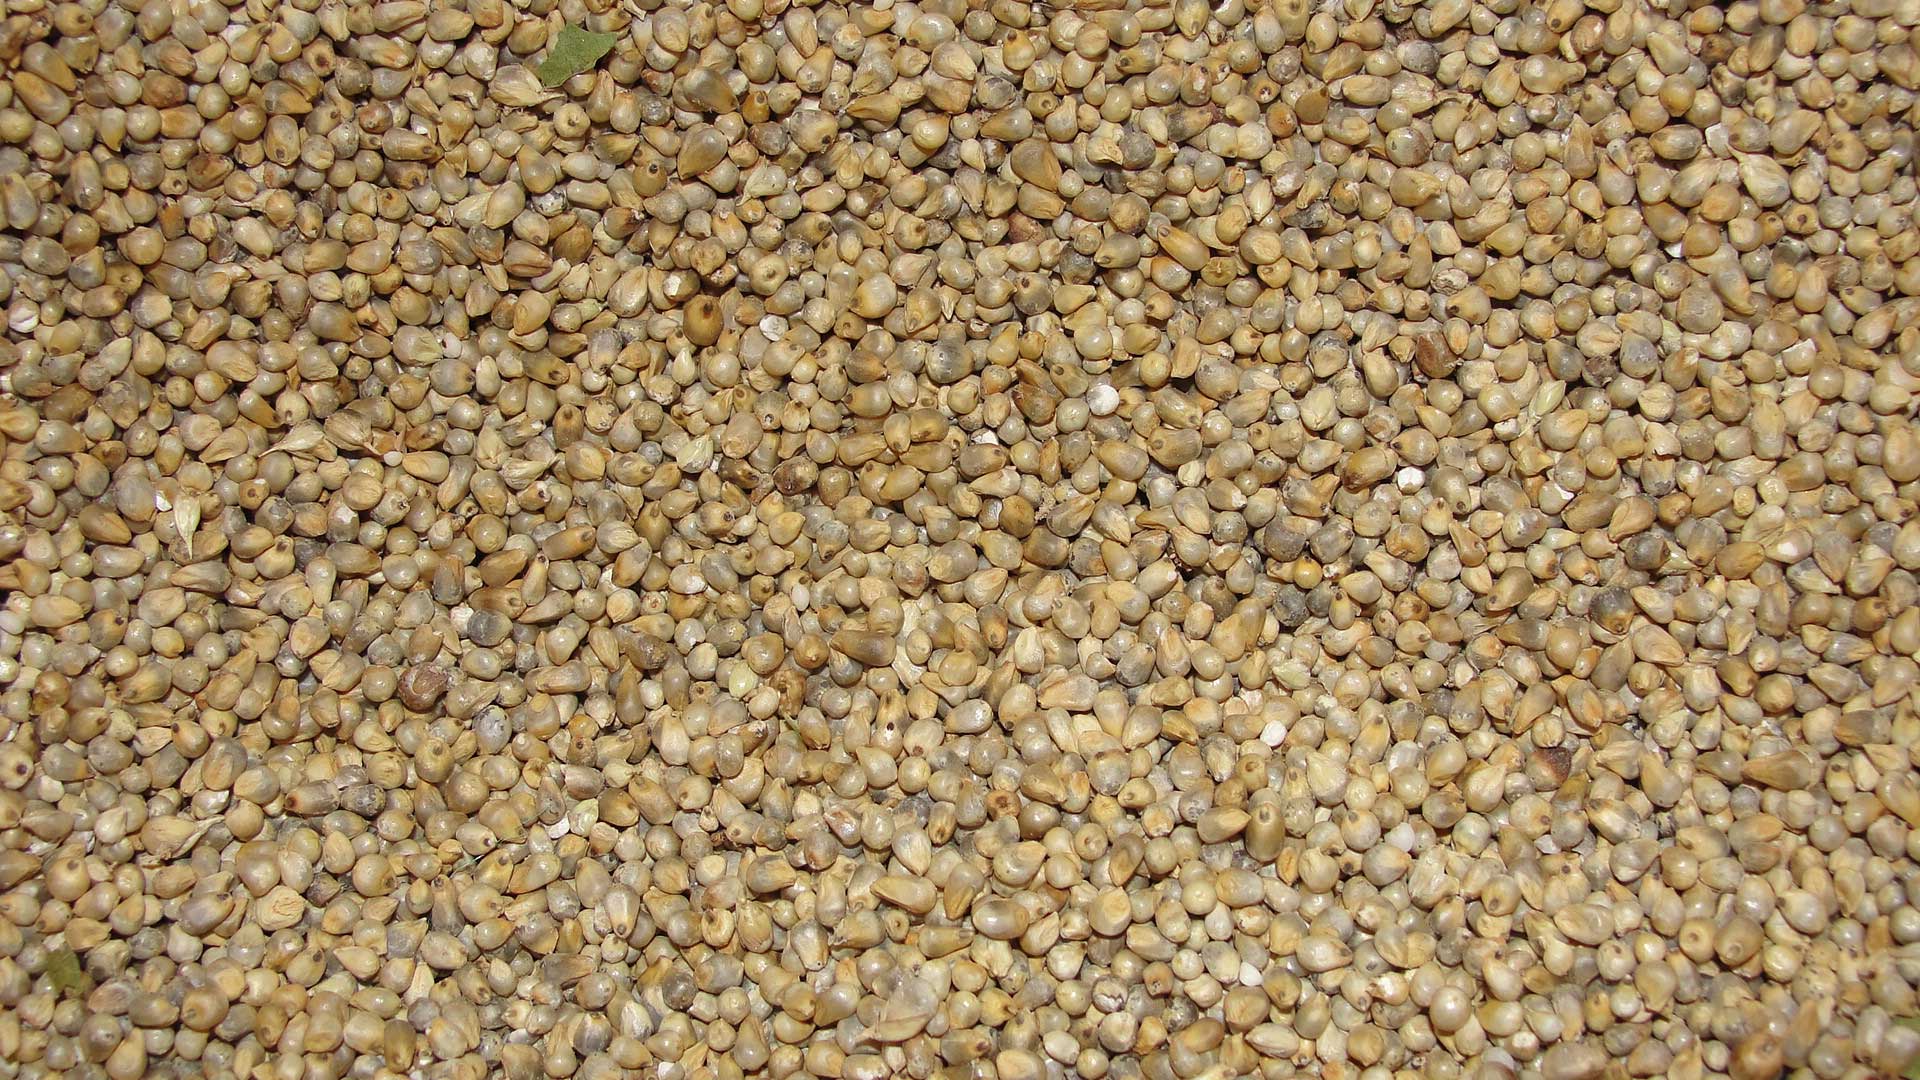 Photograph of grains of pearl millet. The photo shows small, round grains that are light to medium brow